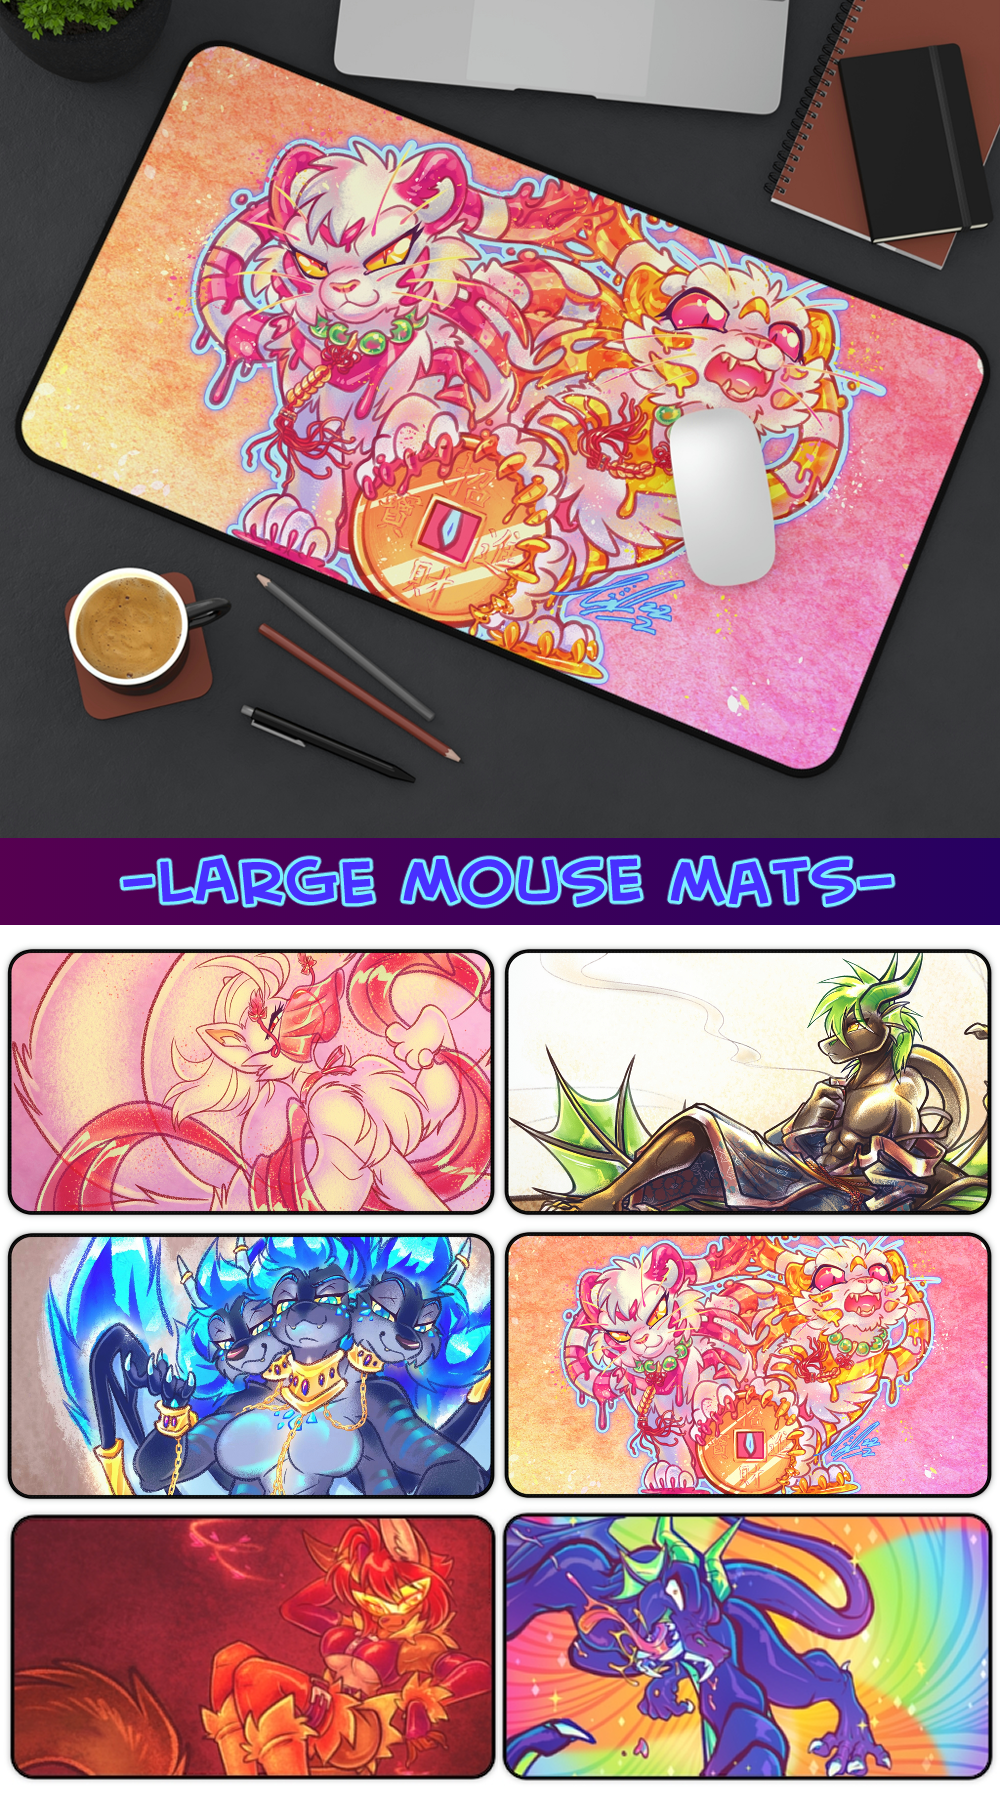 Table Stock: Large Mouse Mats!